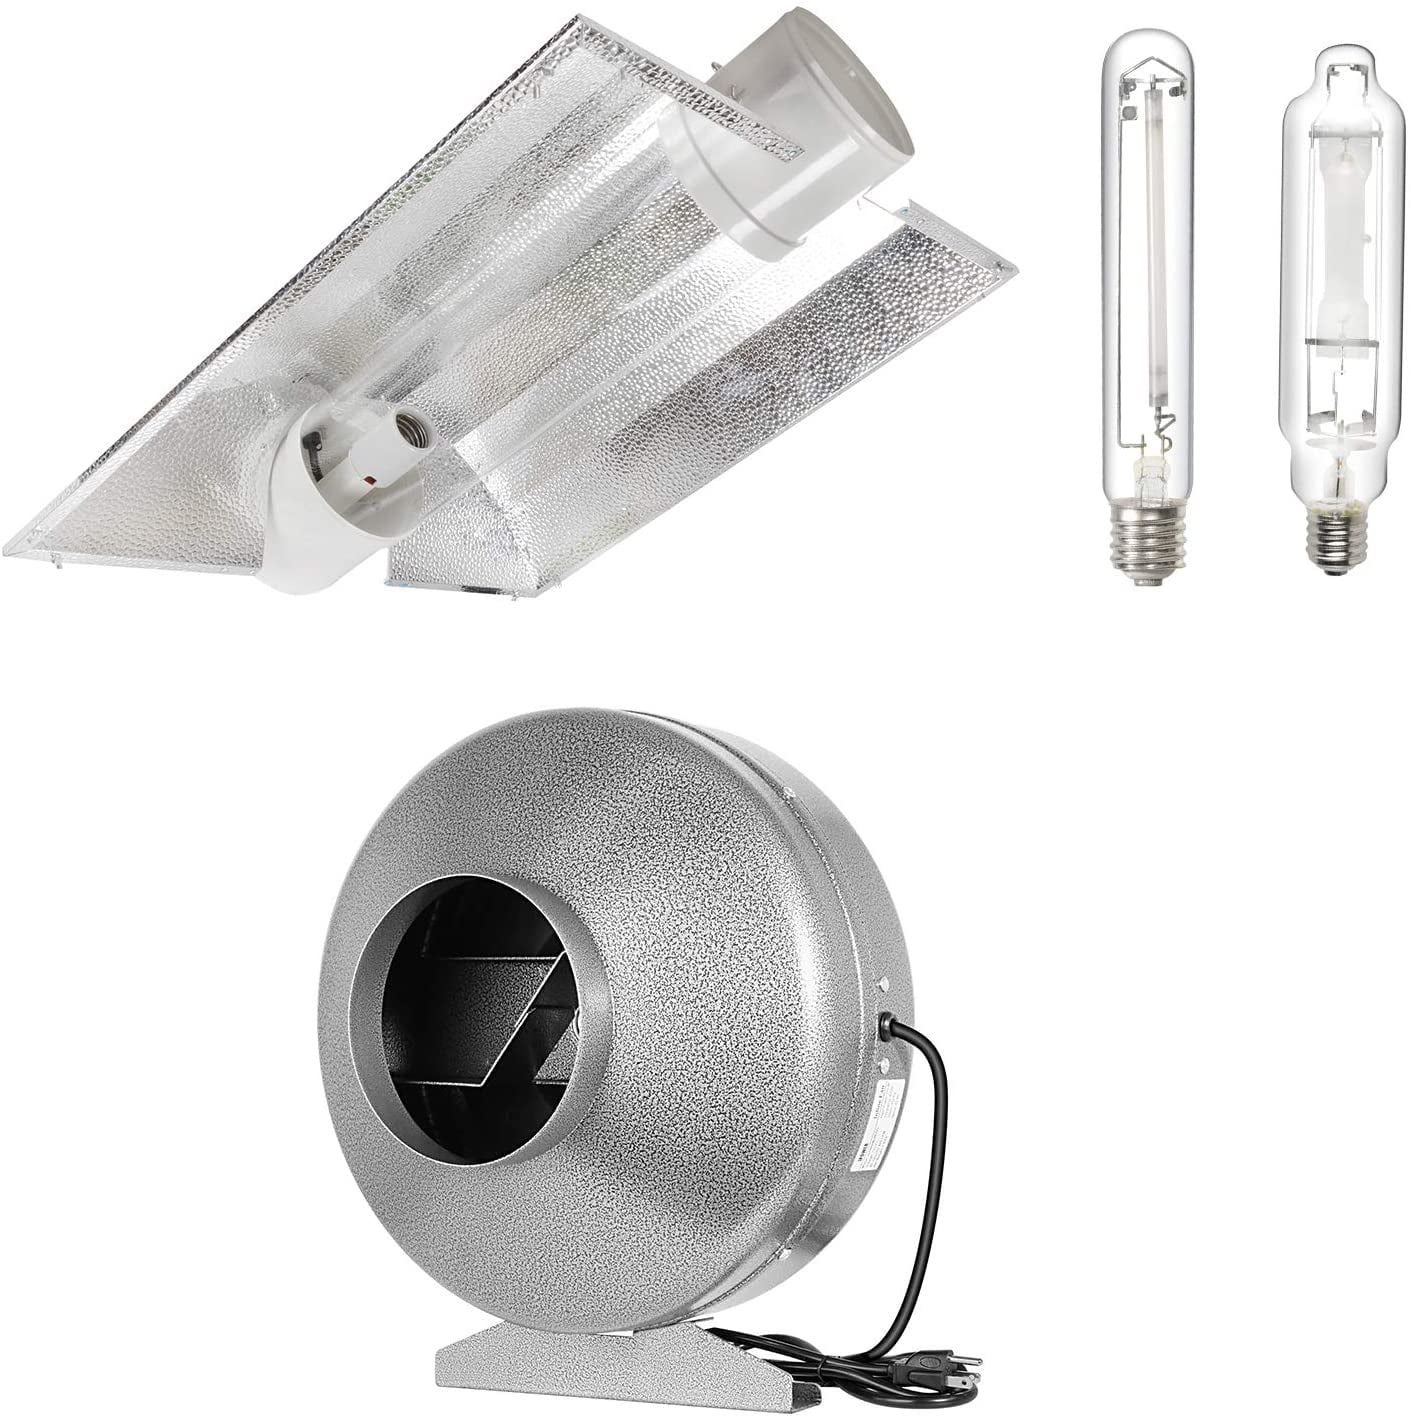 HPS & MH Lamps 600W MAGNETIC BALLAST 6 INCH Cooltube In/Out Reflector Kit 